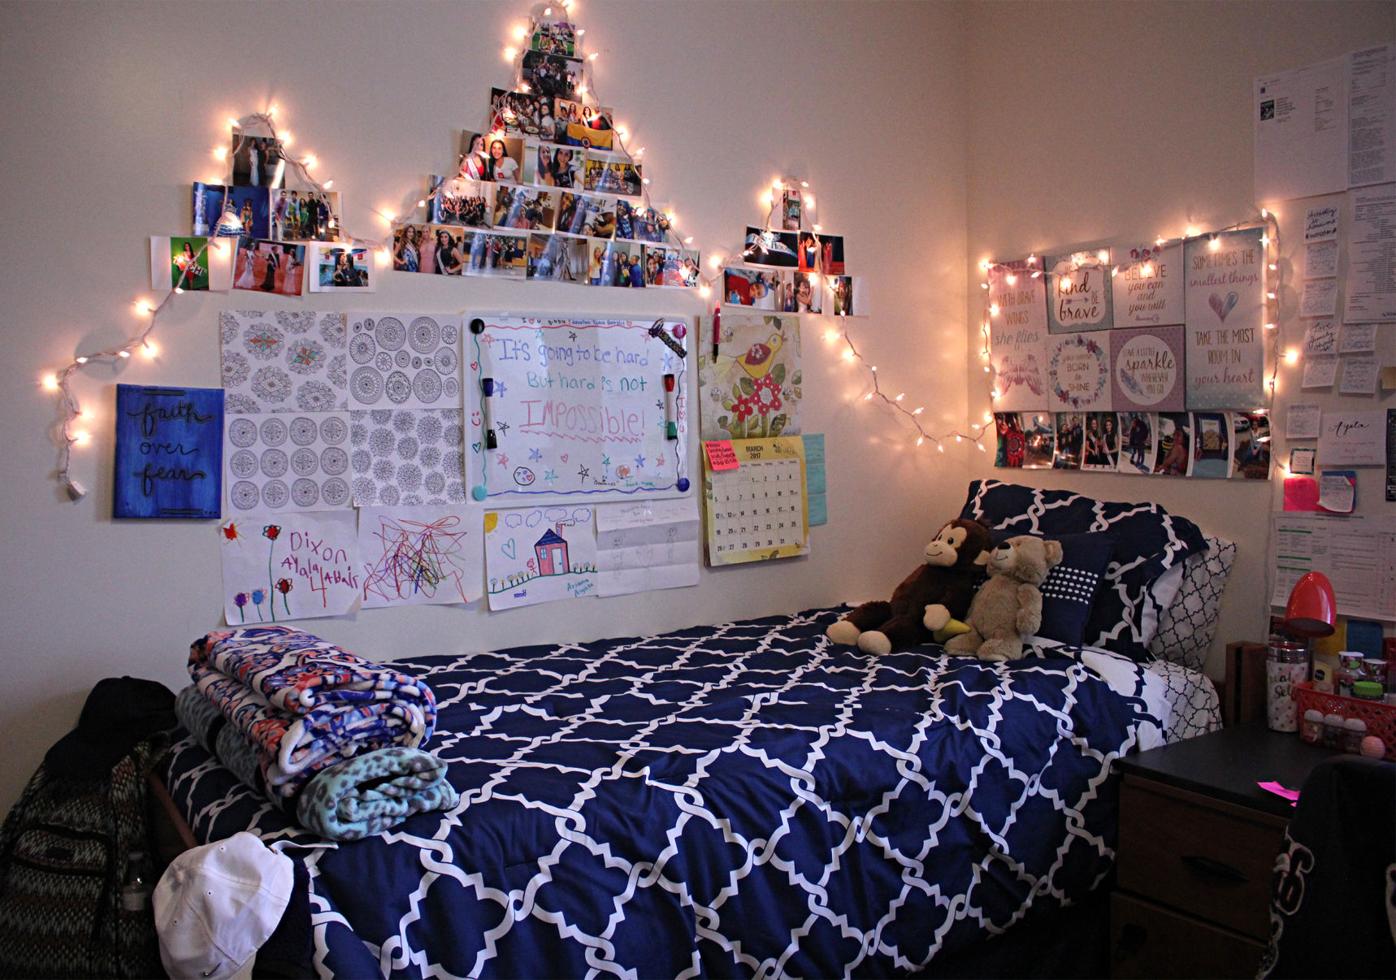 Students decorate dorms to feel more at home | Housing Guide 2017 ...